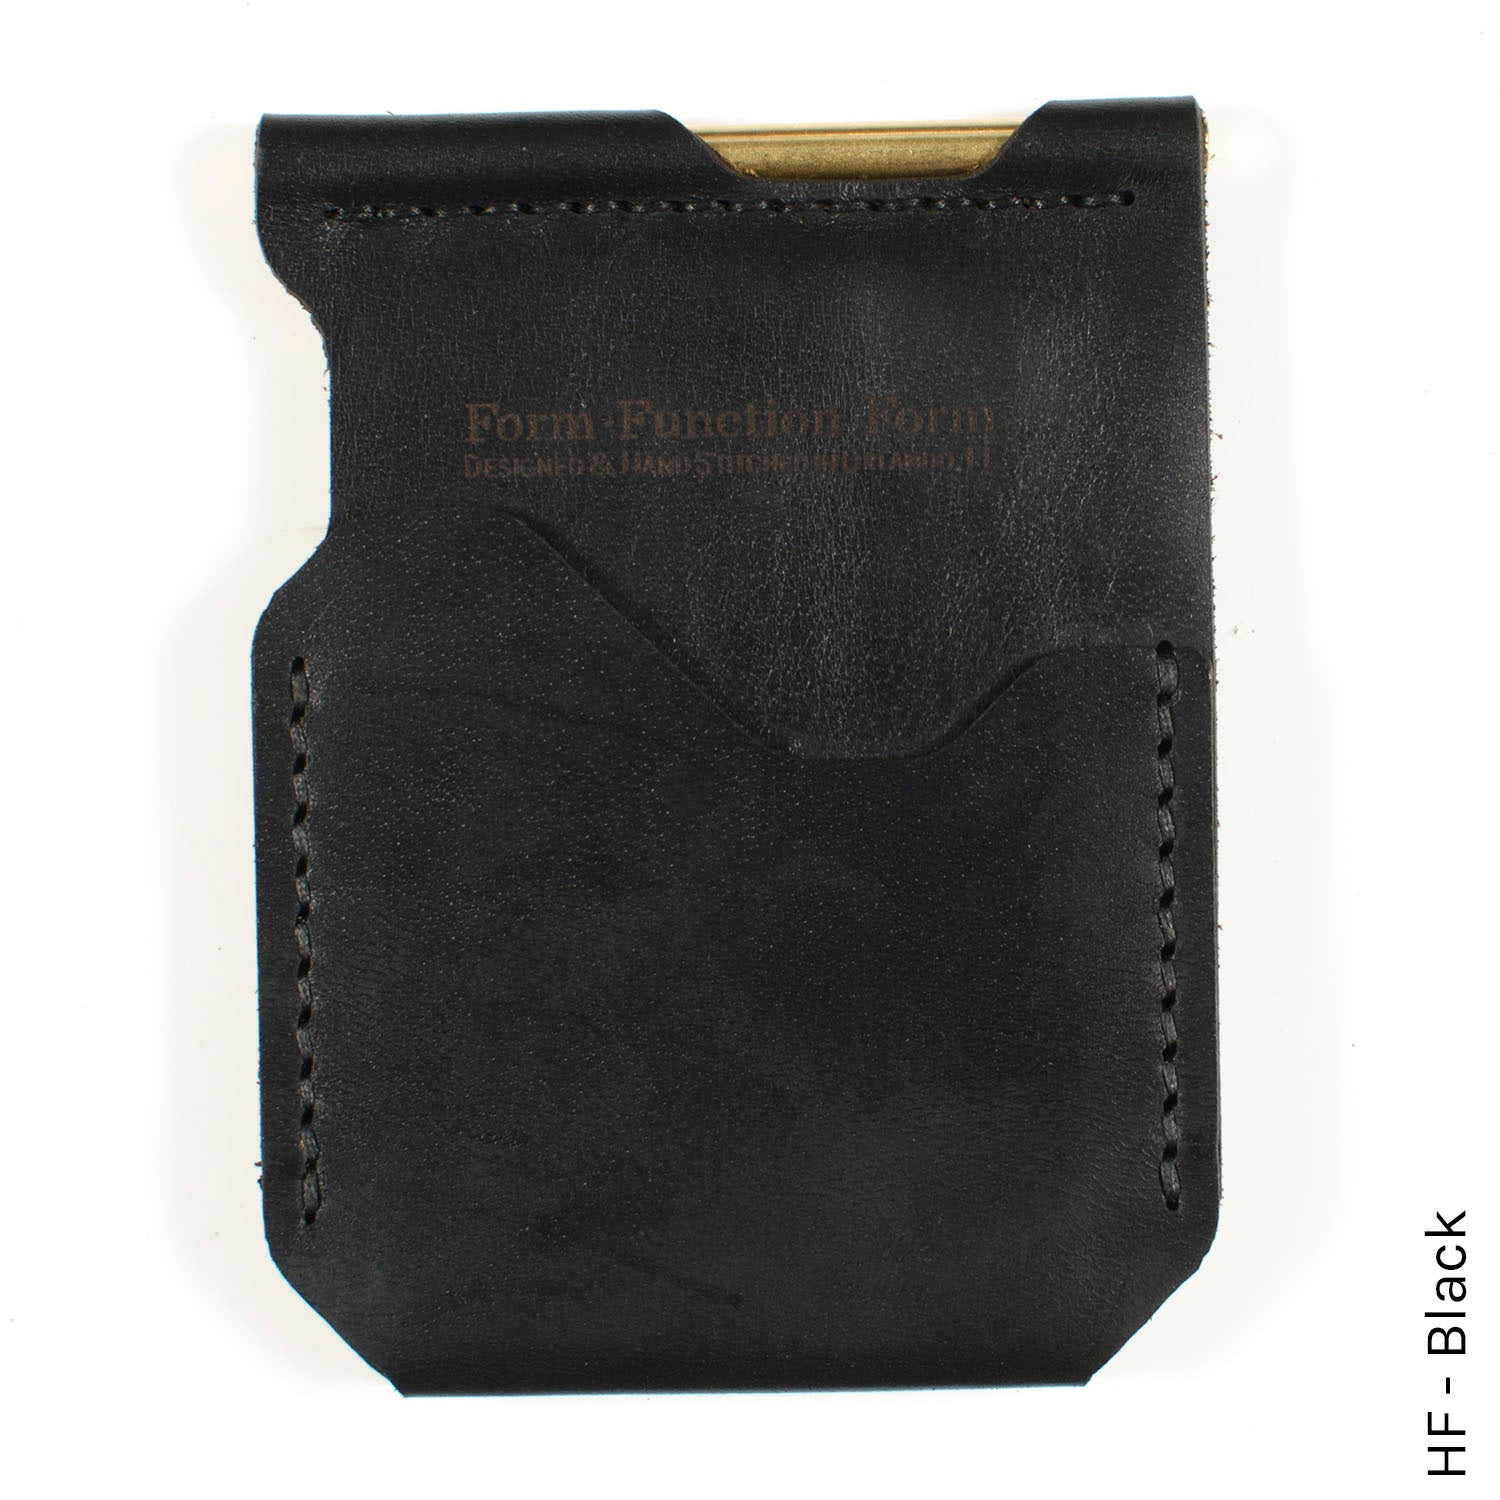 Natural Money Clip Wallet: Quality Leather with Lifetime Guarantee